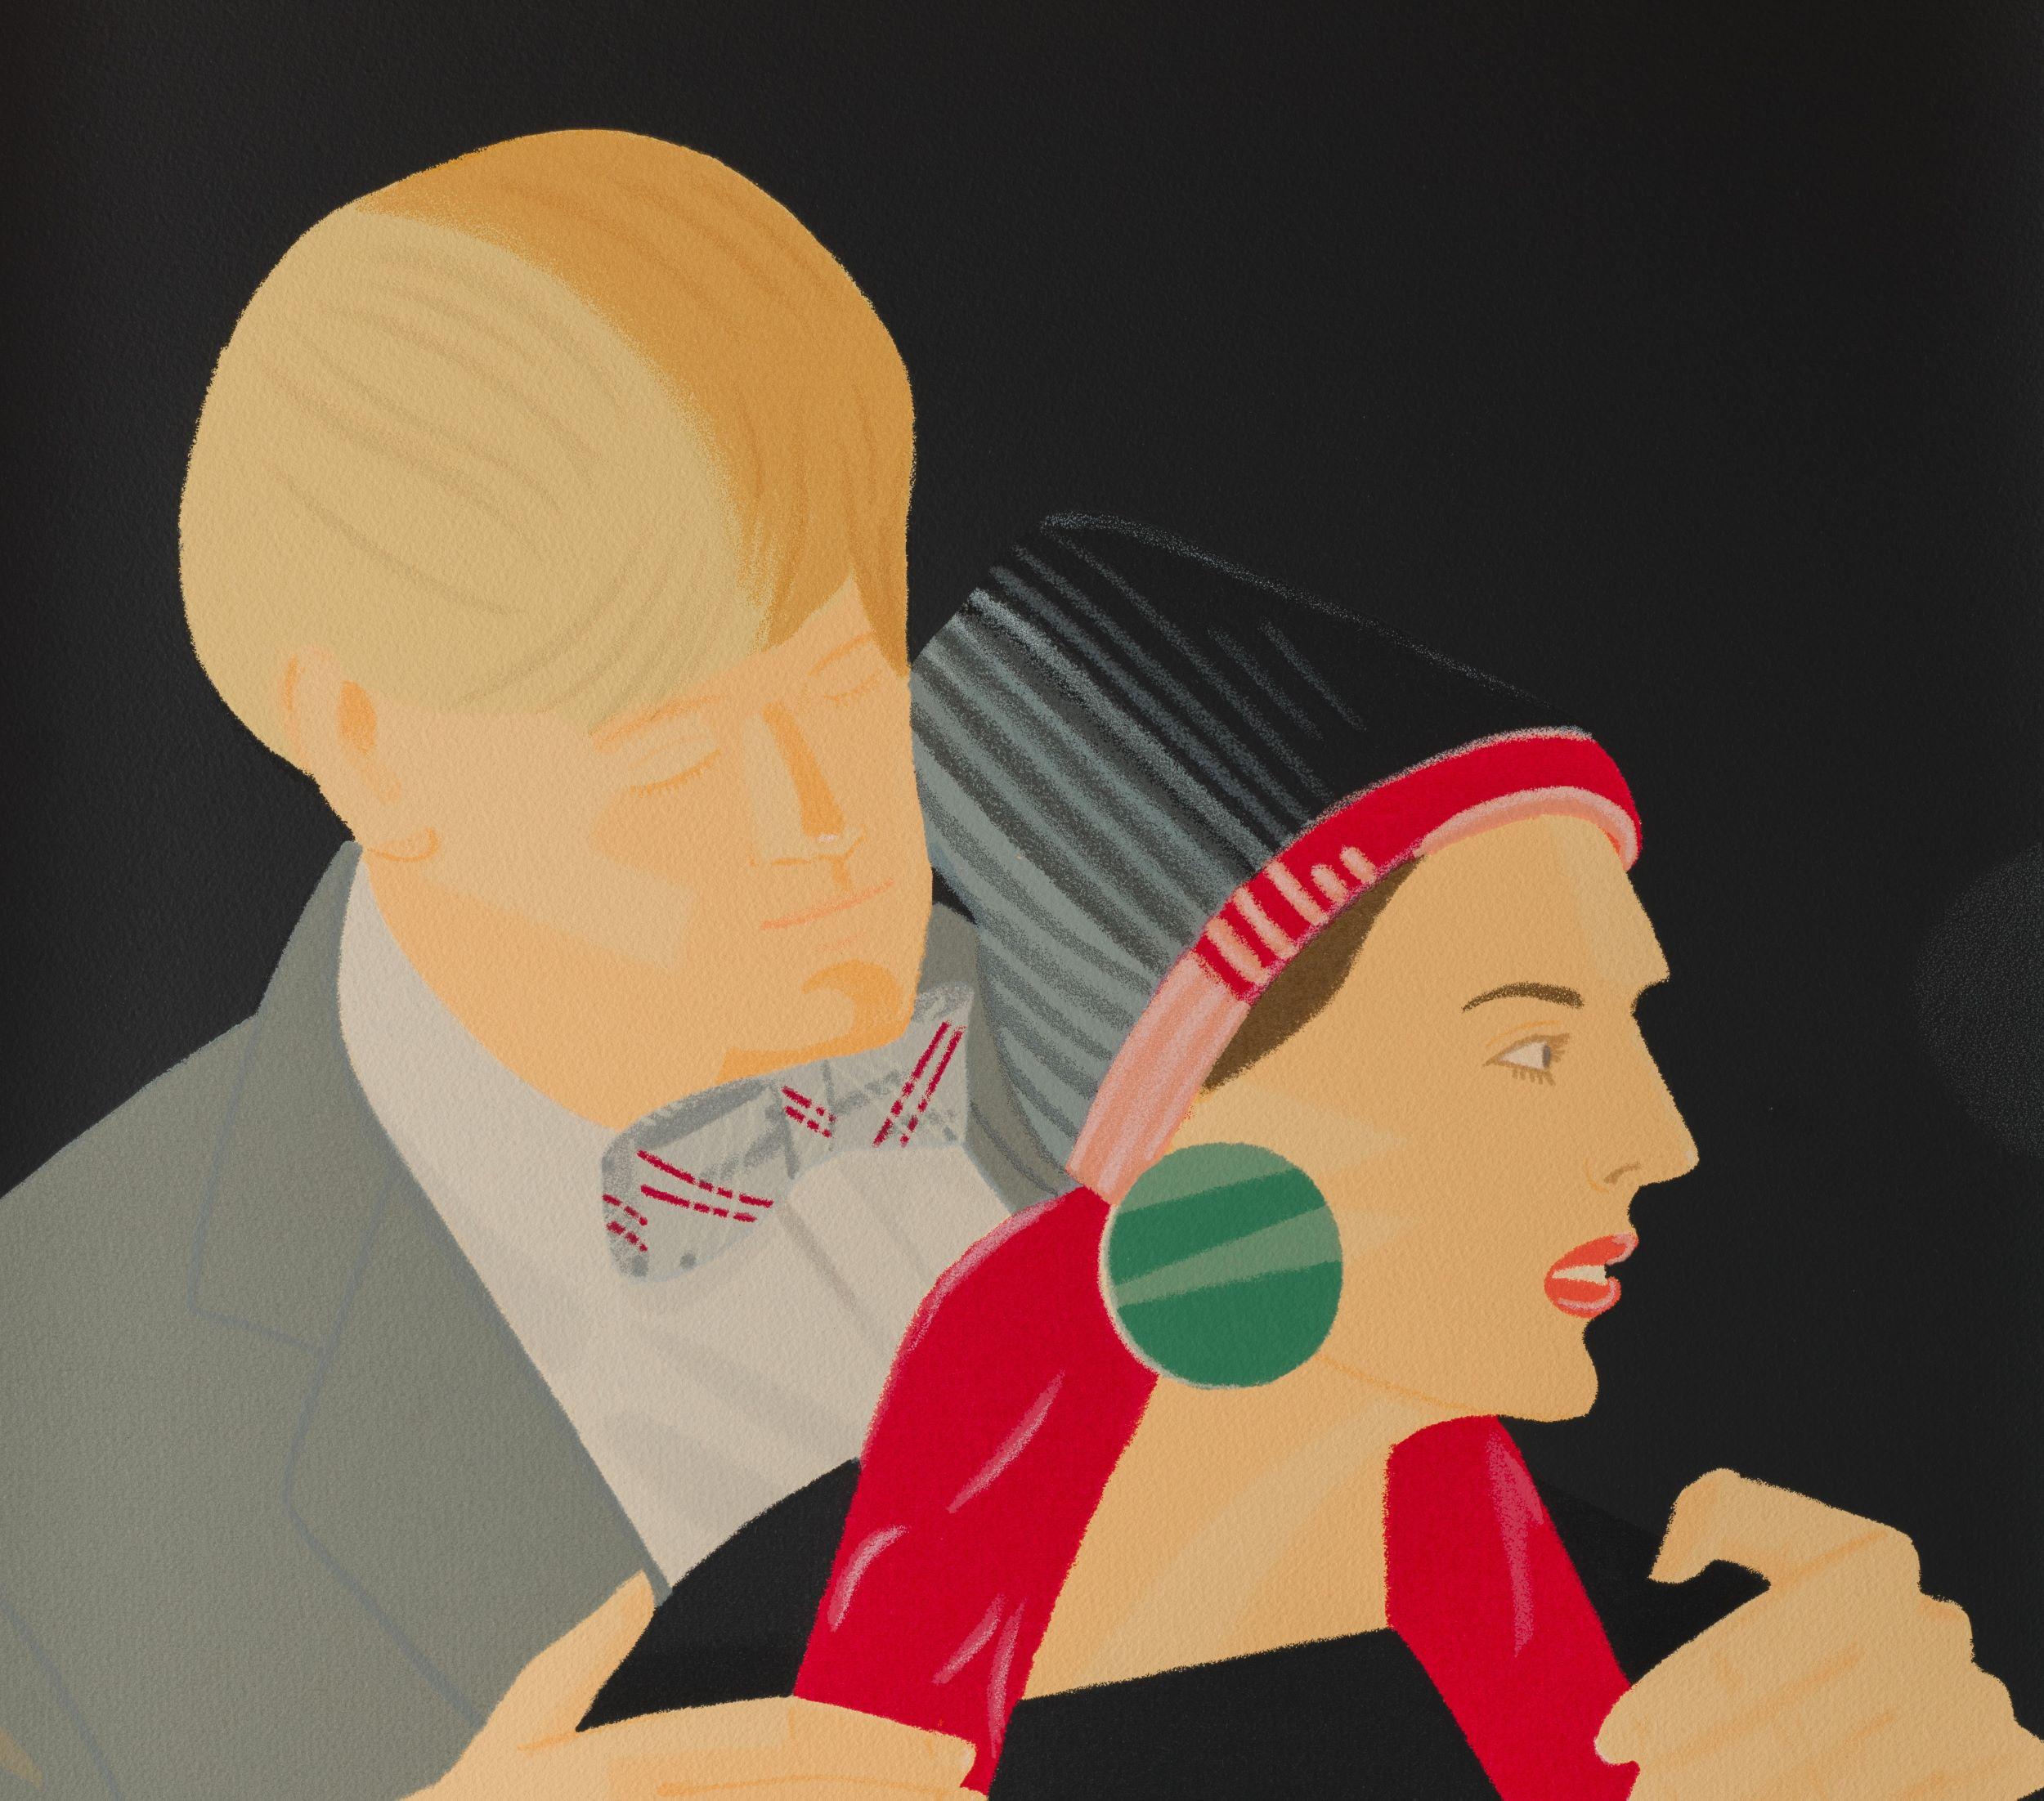 Pas de Deux V (Red Grooms and Liz Ross) is a serigraph on paper with an image size of 36 x 20 inches, signed ‘Alex Katz’ lower left and numbered 75/150. From the edition of 173 (there were also 18 AP, 3 PP, and 2 RTP). Framed in a contemporary black